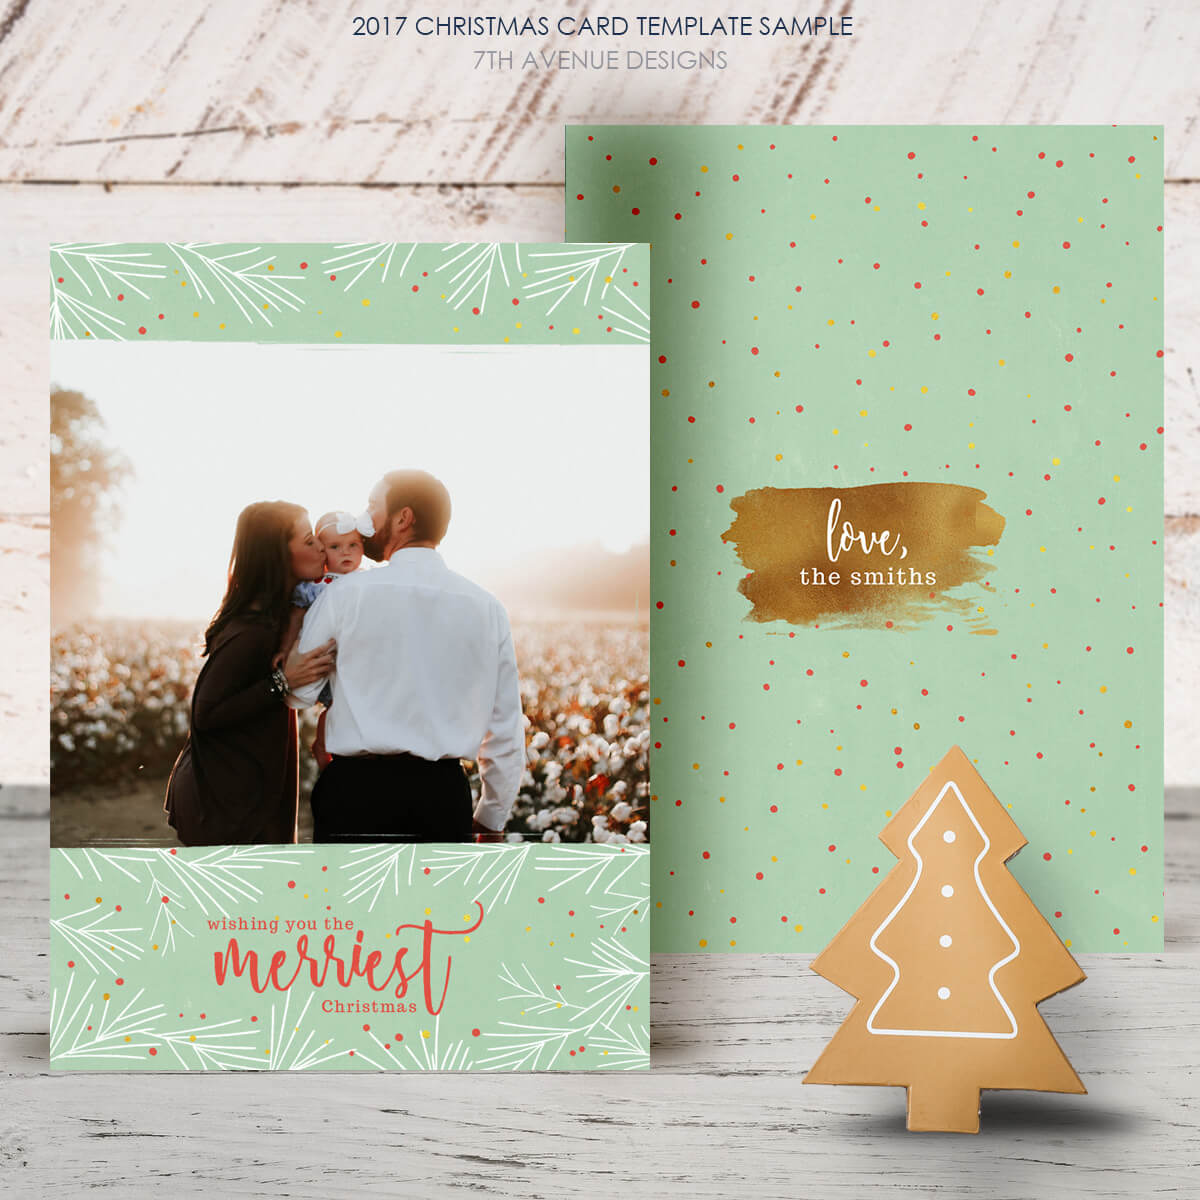 Free Christmas Card 2017 [Freecc2017] - It's Free In Free Christmas Card Templates For Photographers